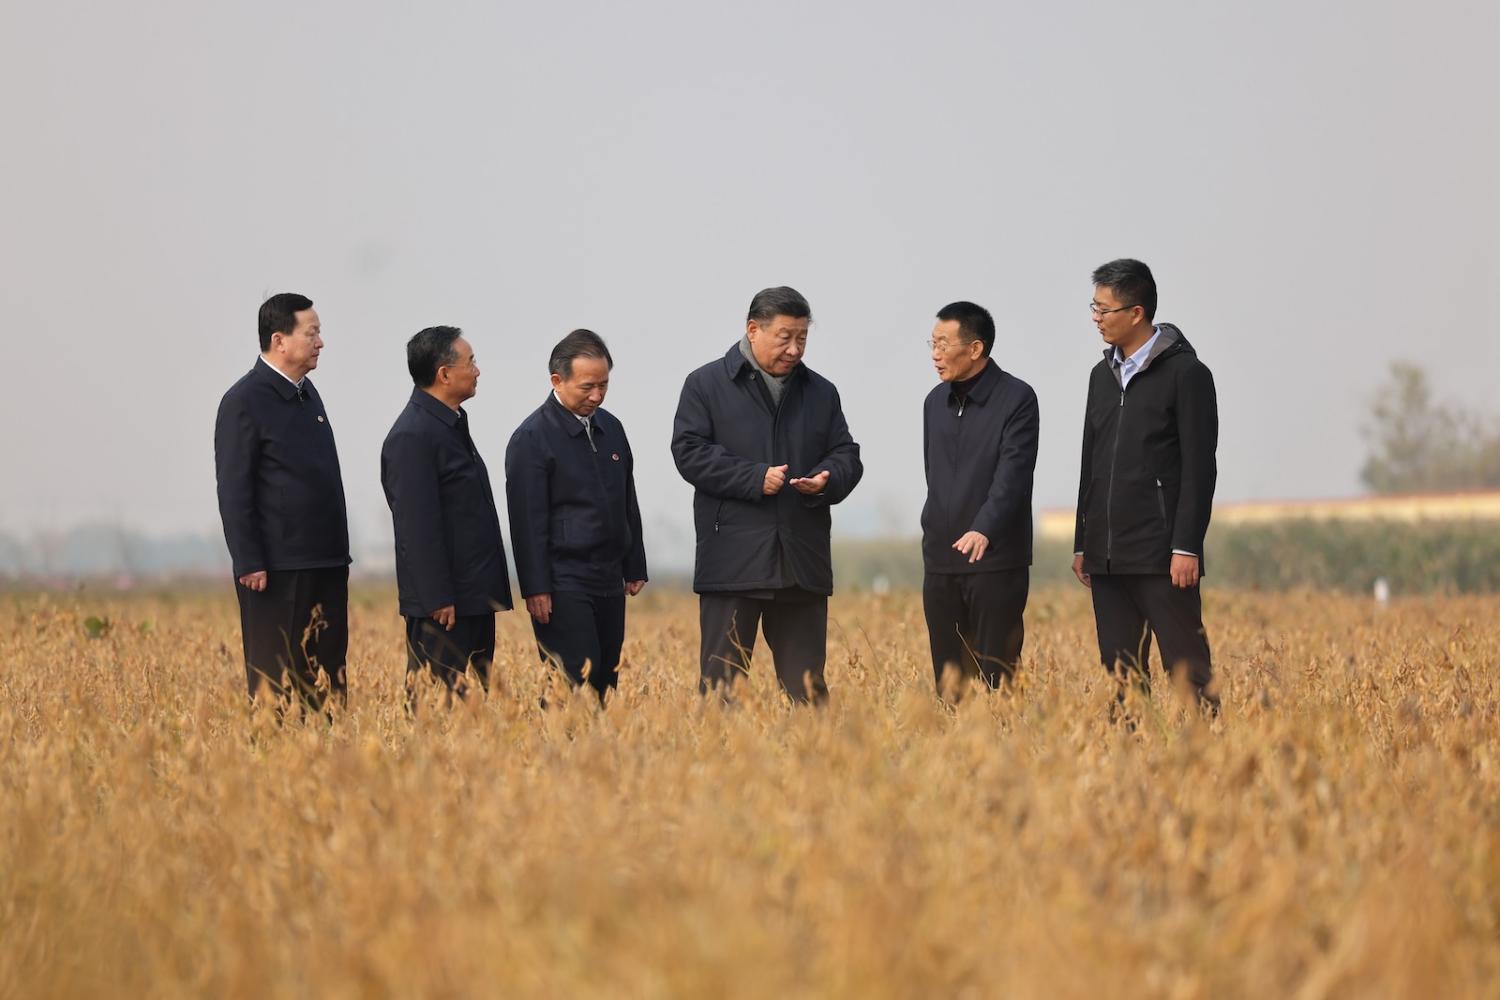 China’s President Xi Jinping (fourth from left) during a visit to the Yellow River Delta near Dongying, Shandong Province, 21 October (Wang Ye/Xinhua via Getty Images)